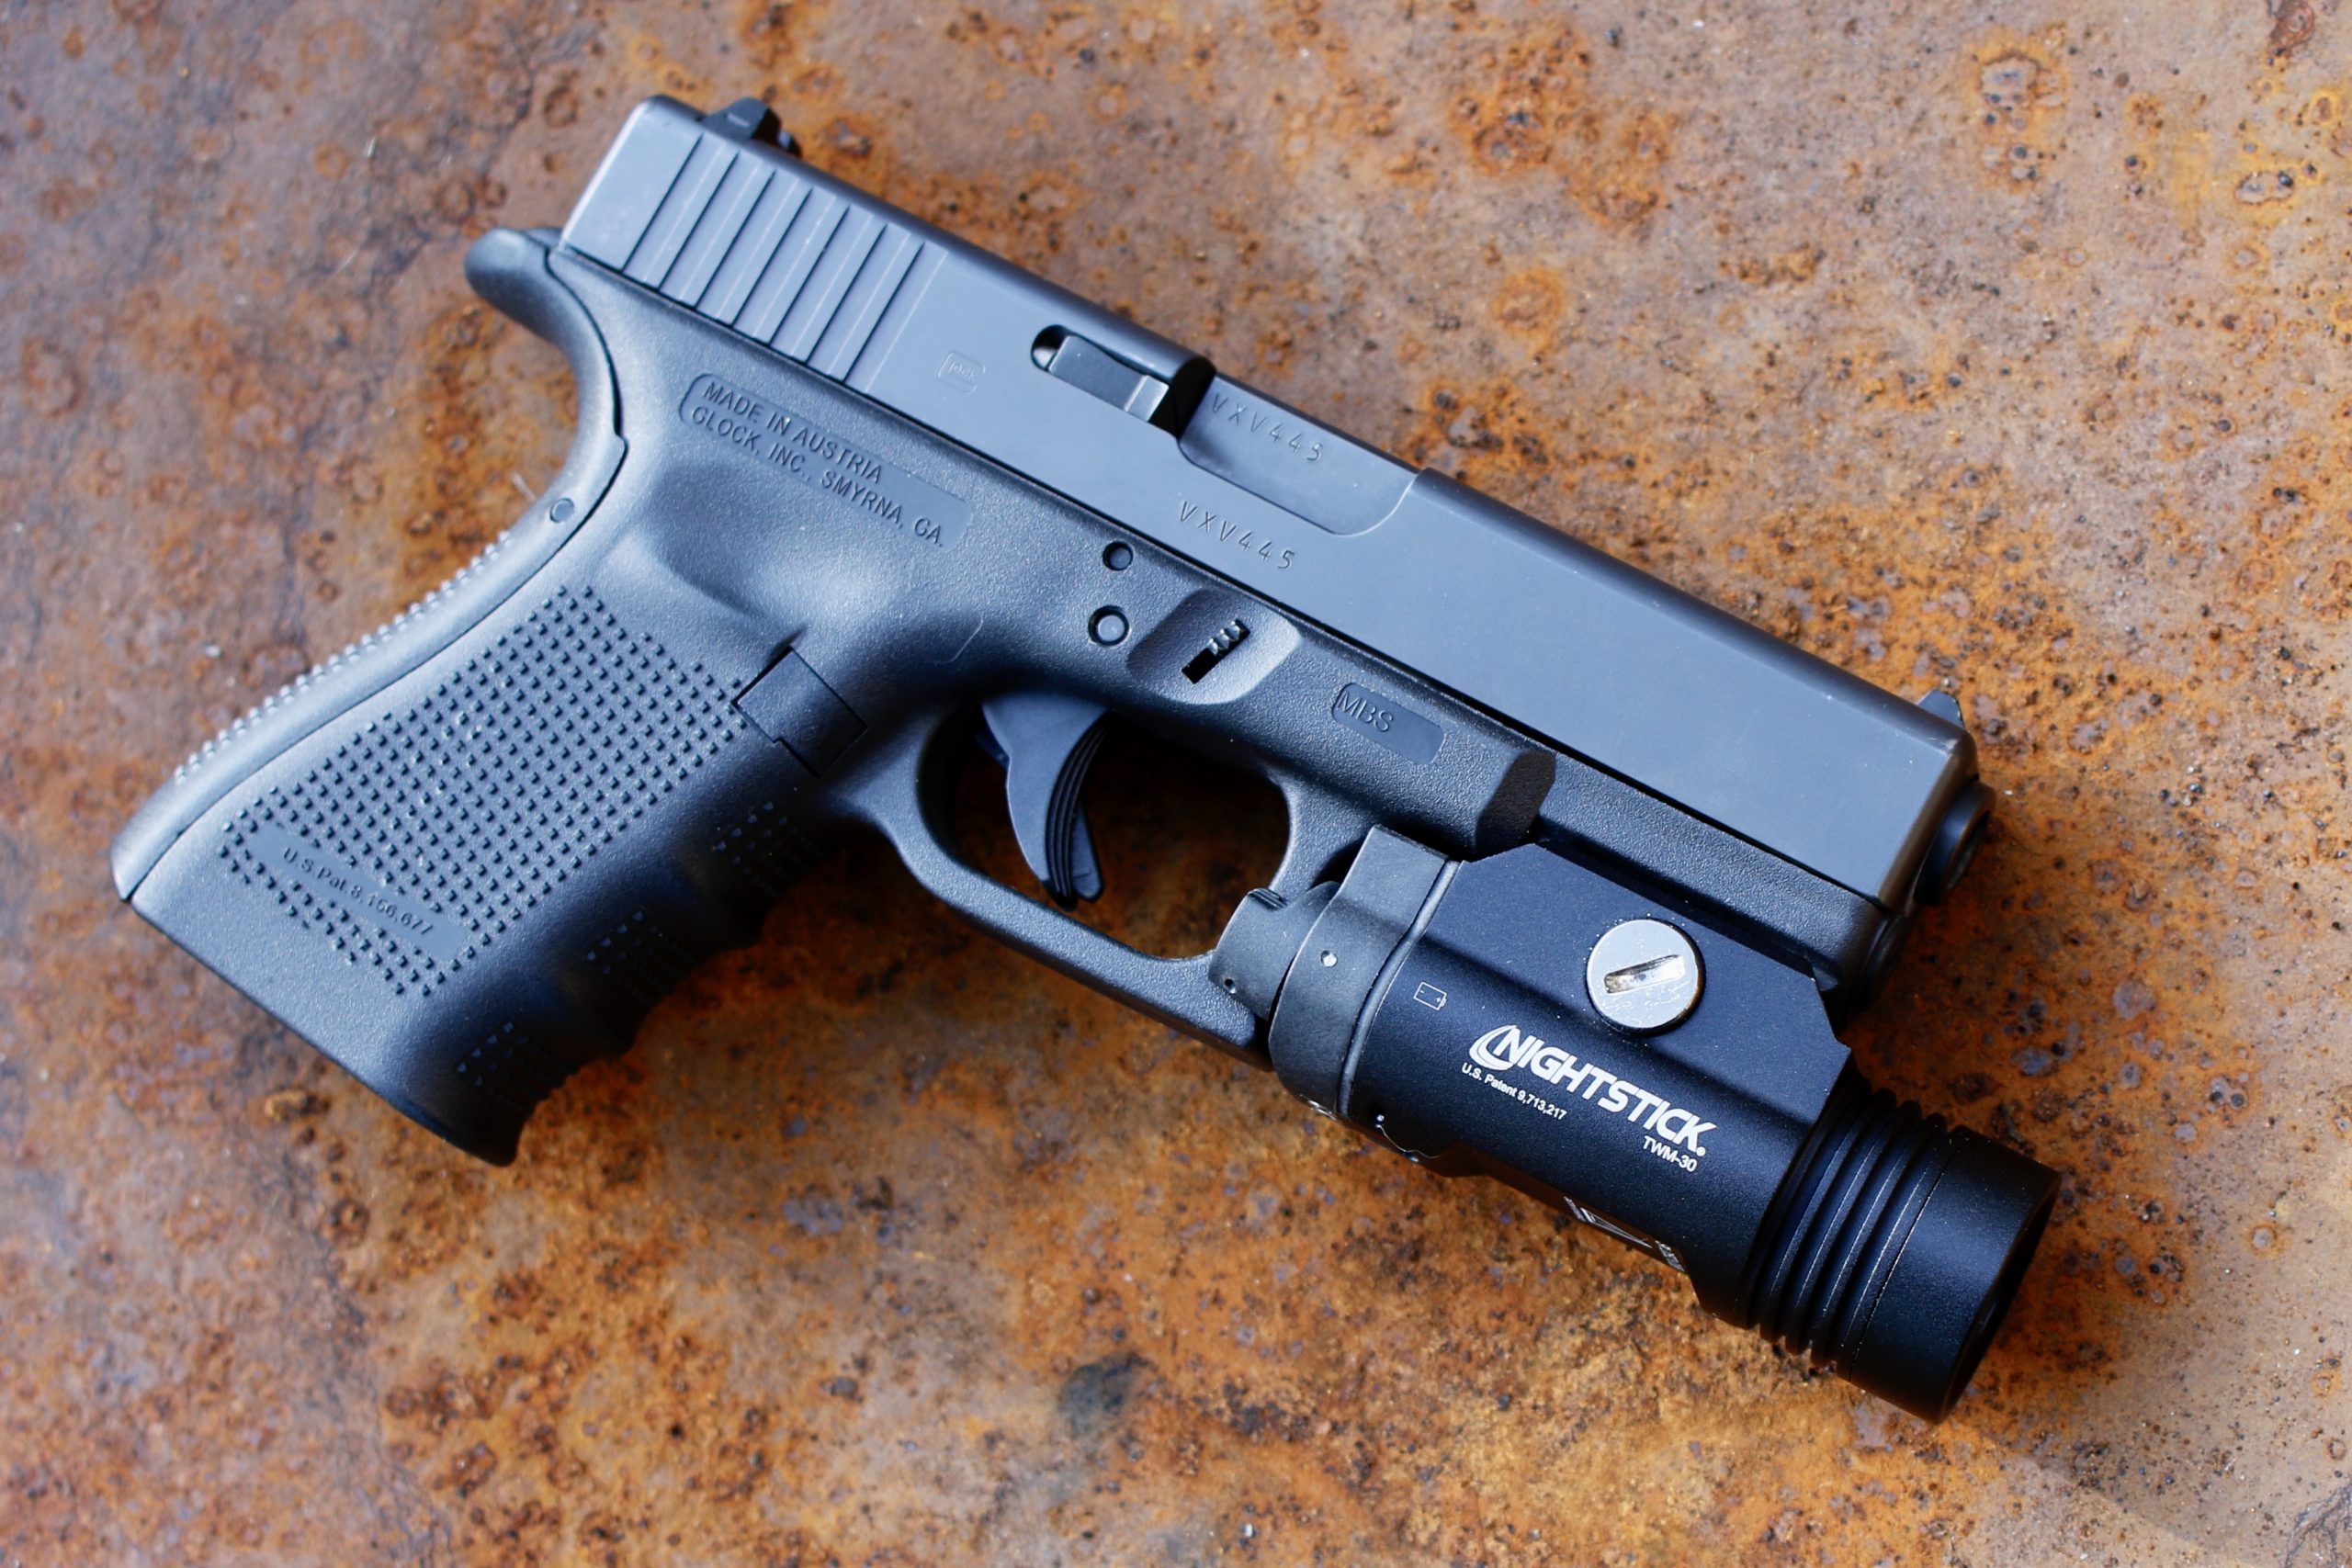 With the right insert in place, the Nightstick TMW-30 fits on the GLOCK 19.